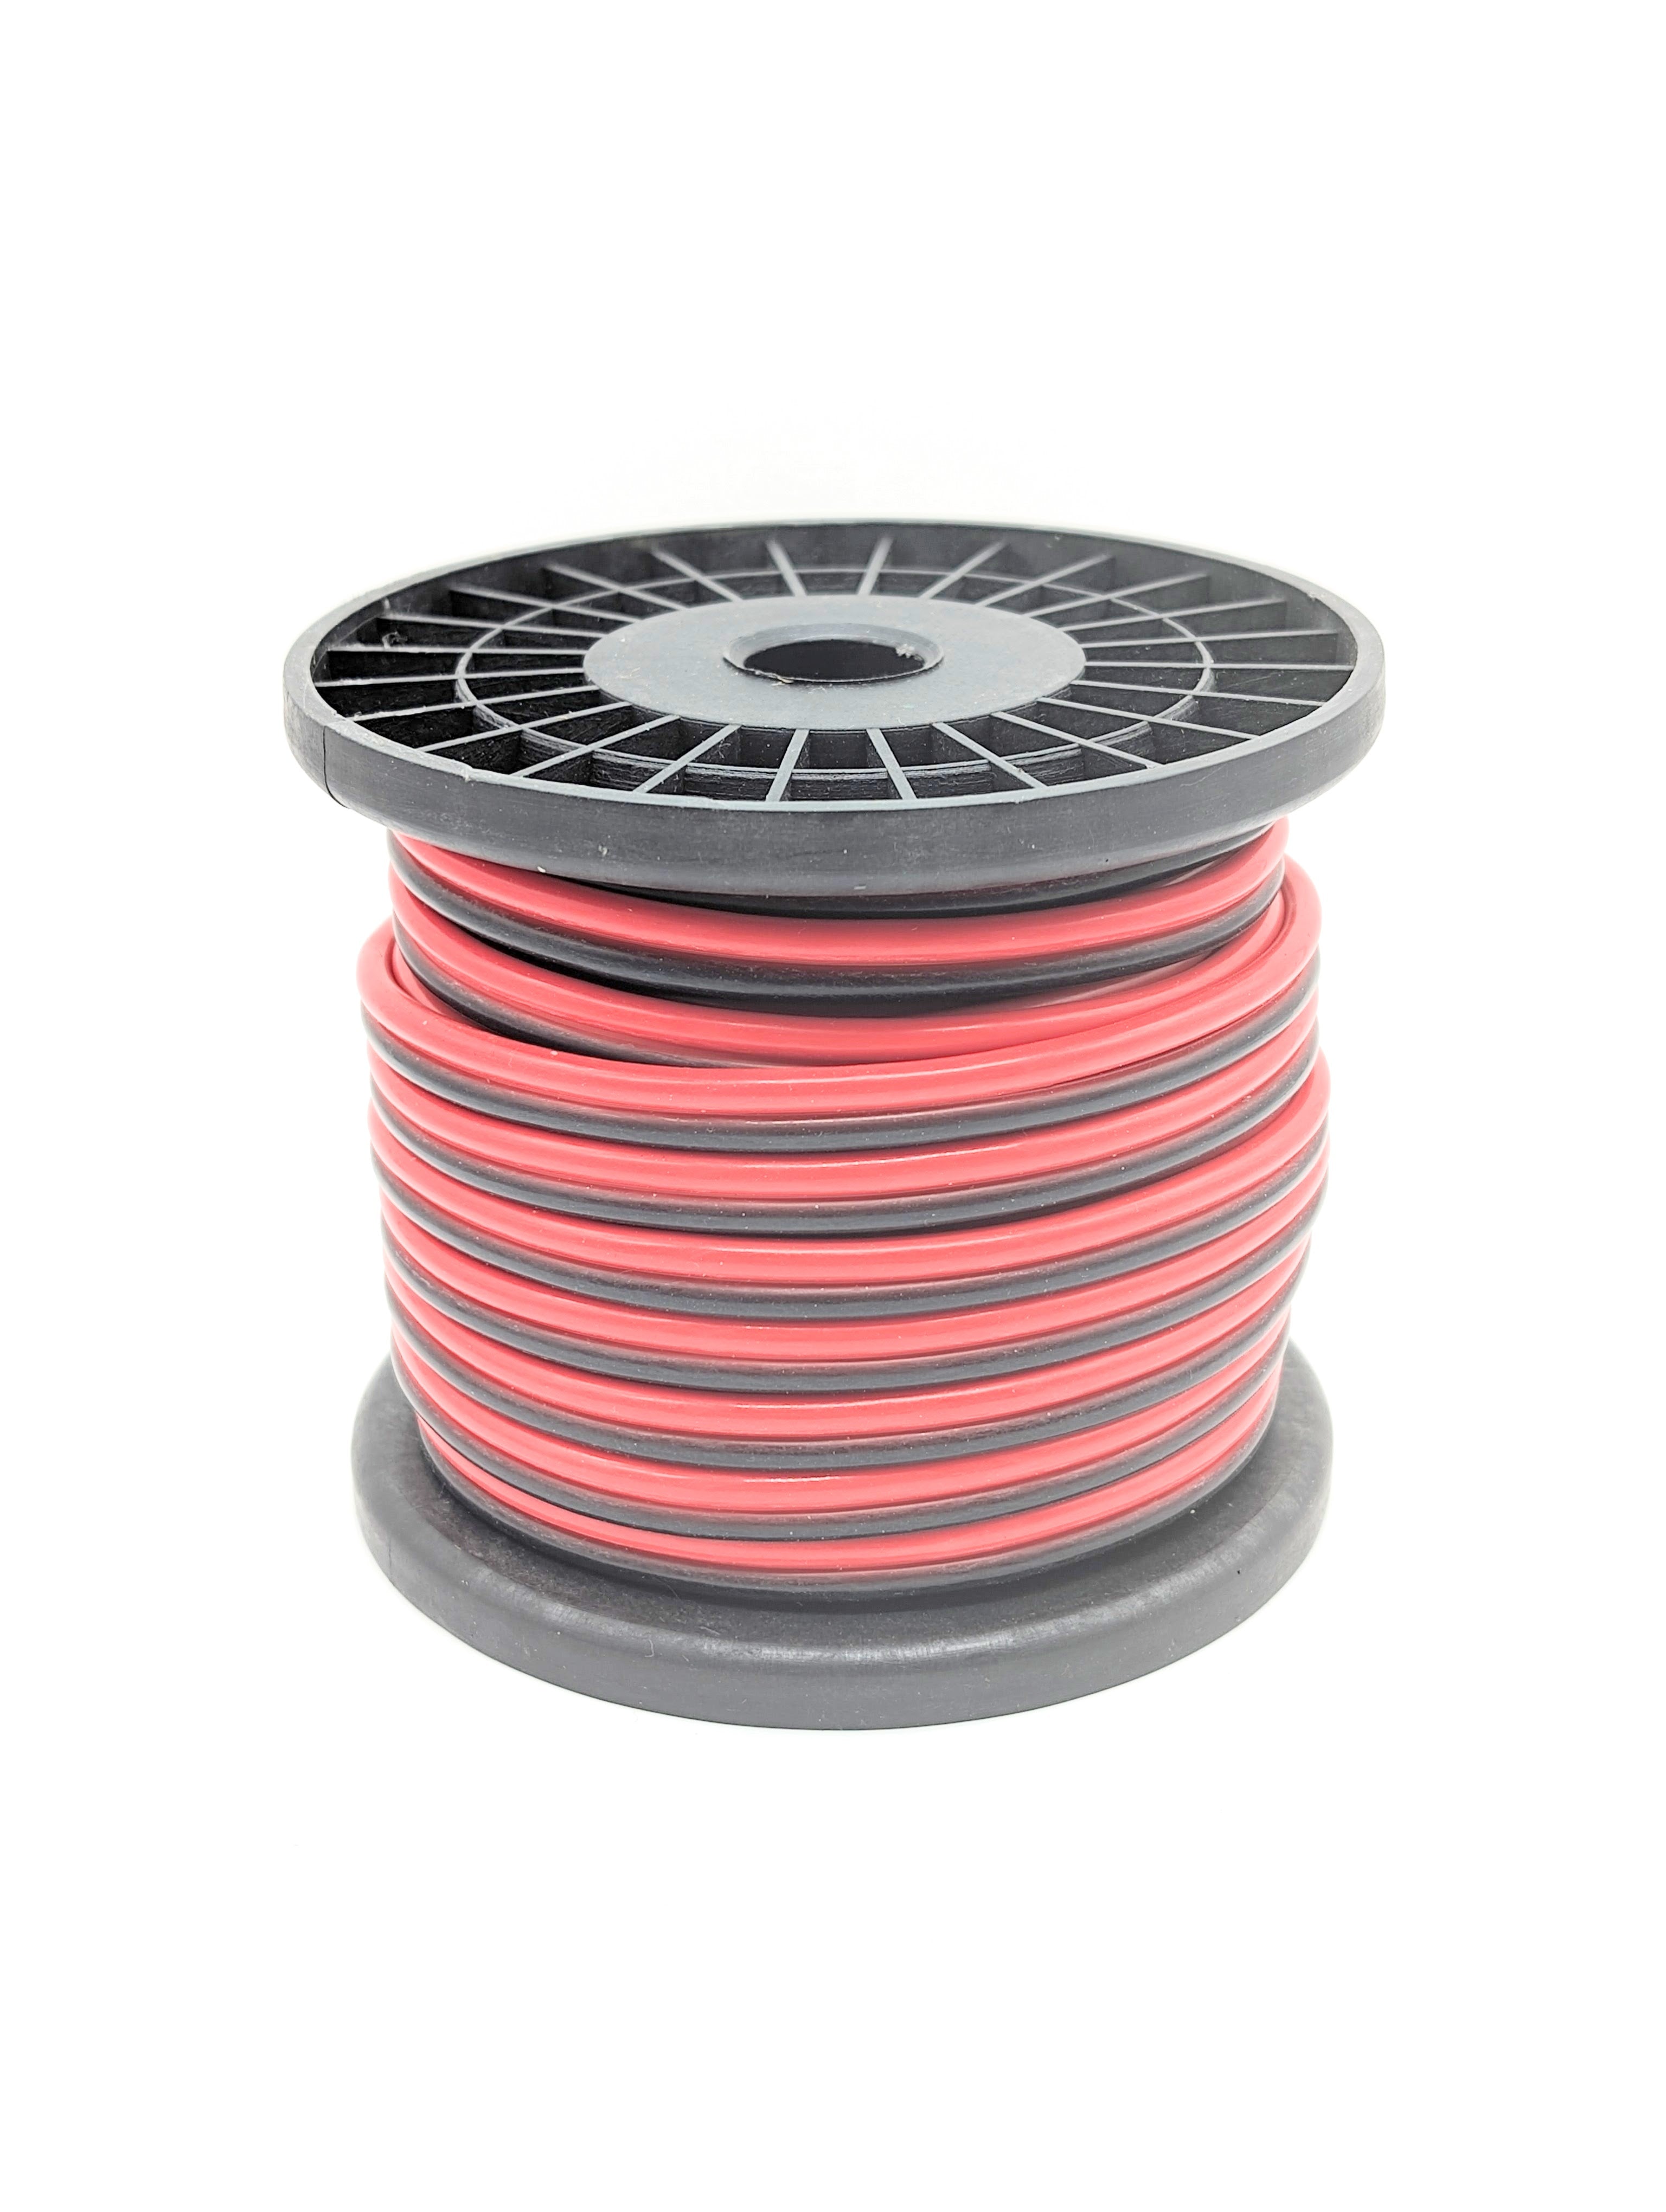 50 Feet - Bonded 12 AWG Flexible Silicone Jacketed Wire